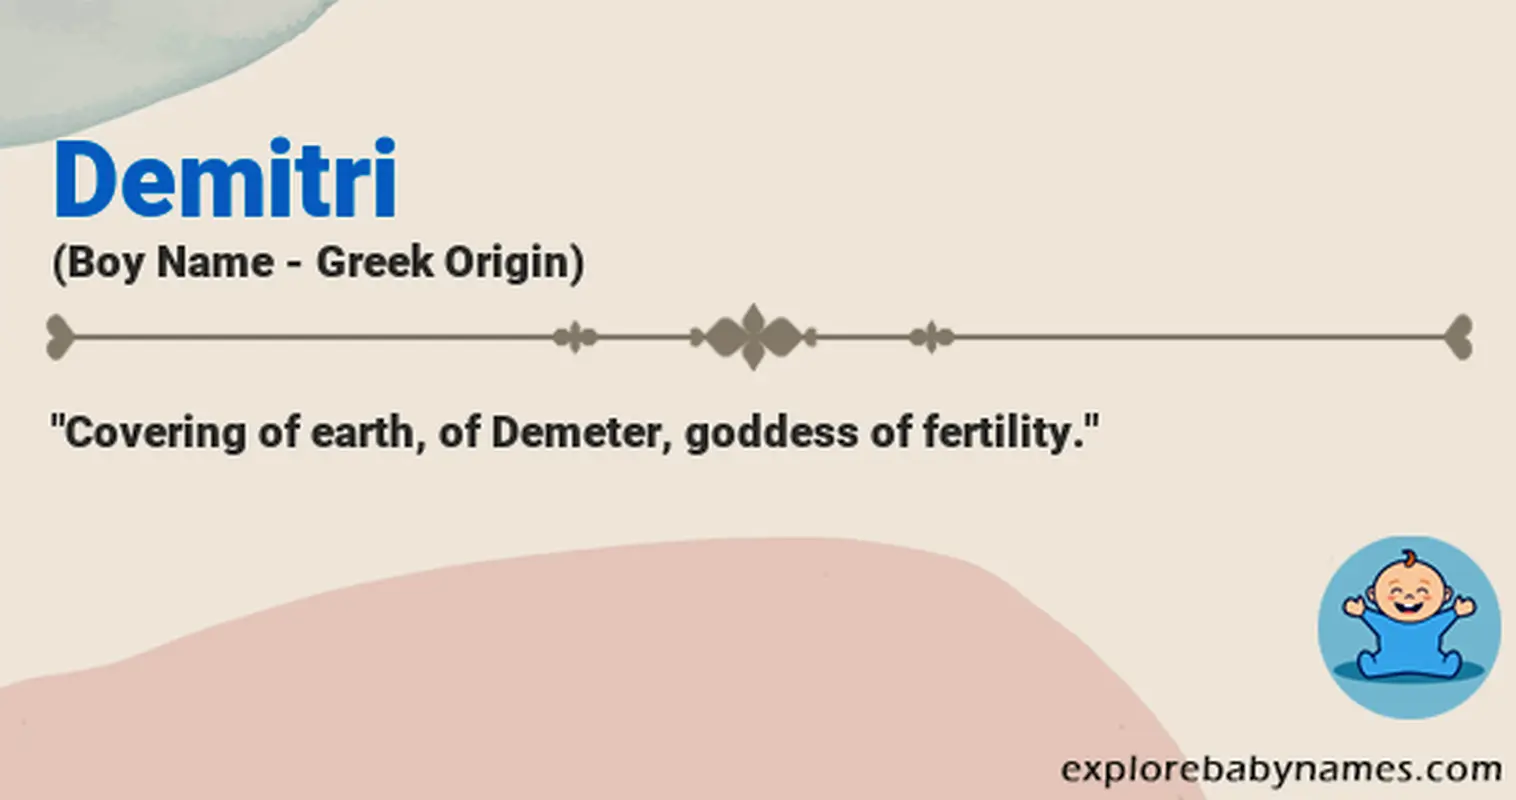 Meaning of Demitri